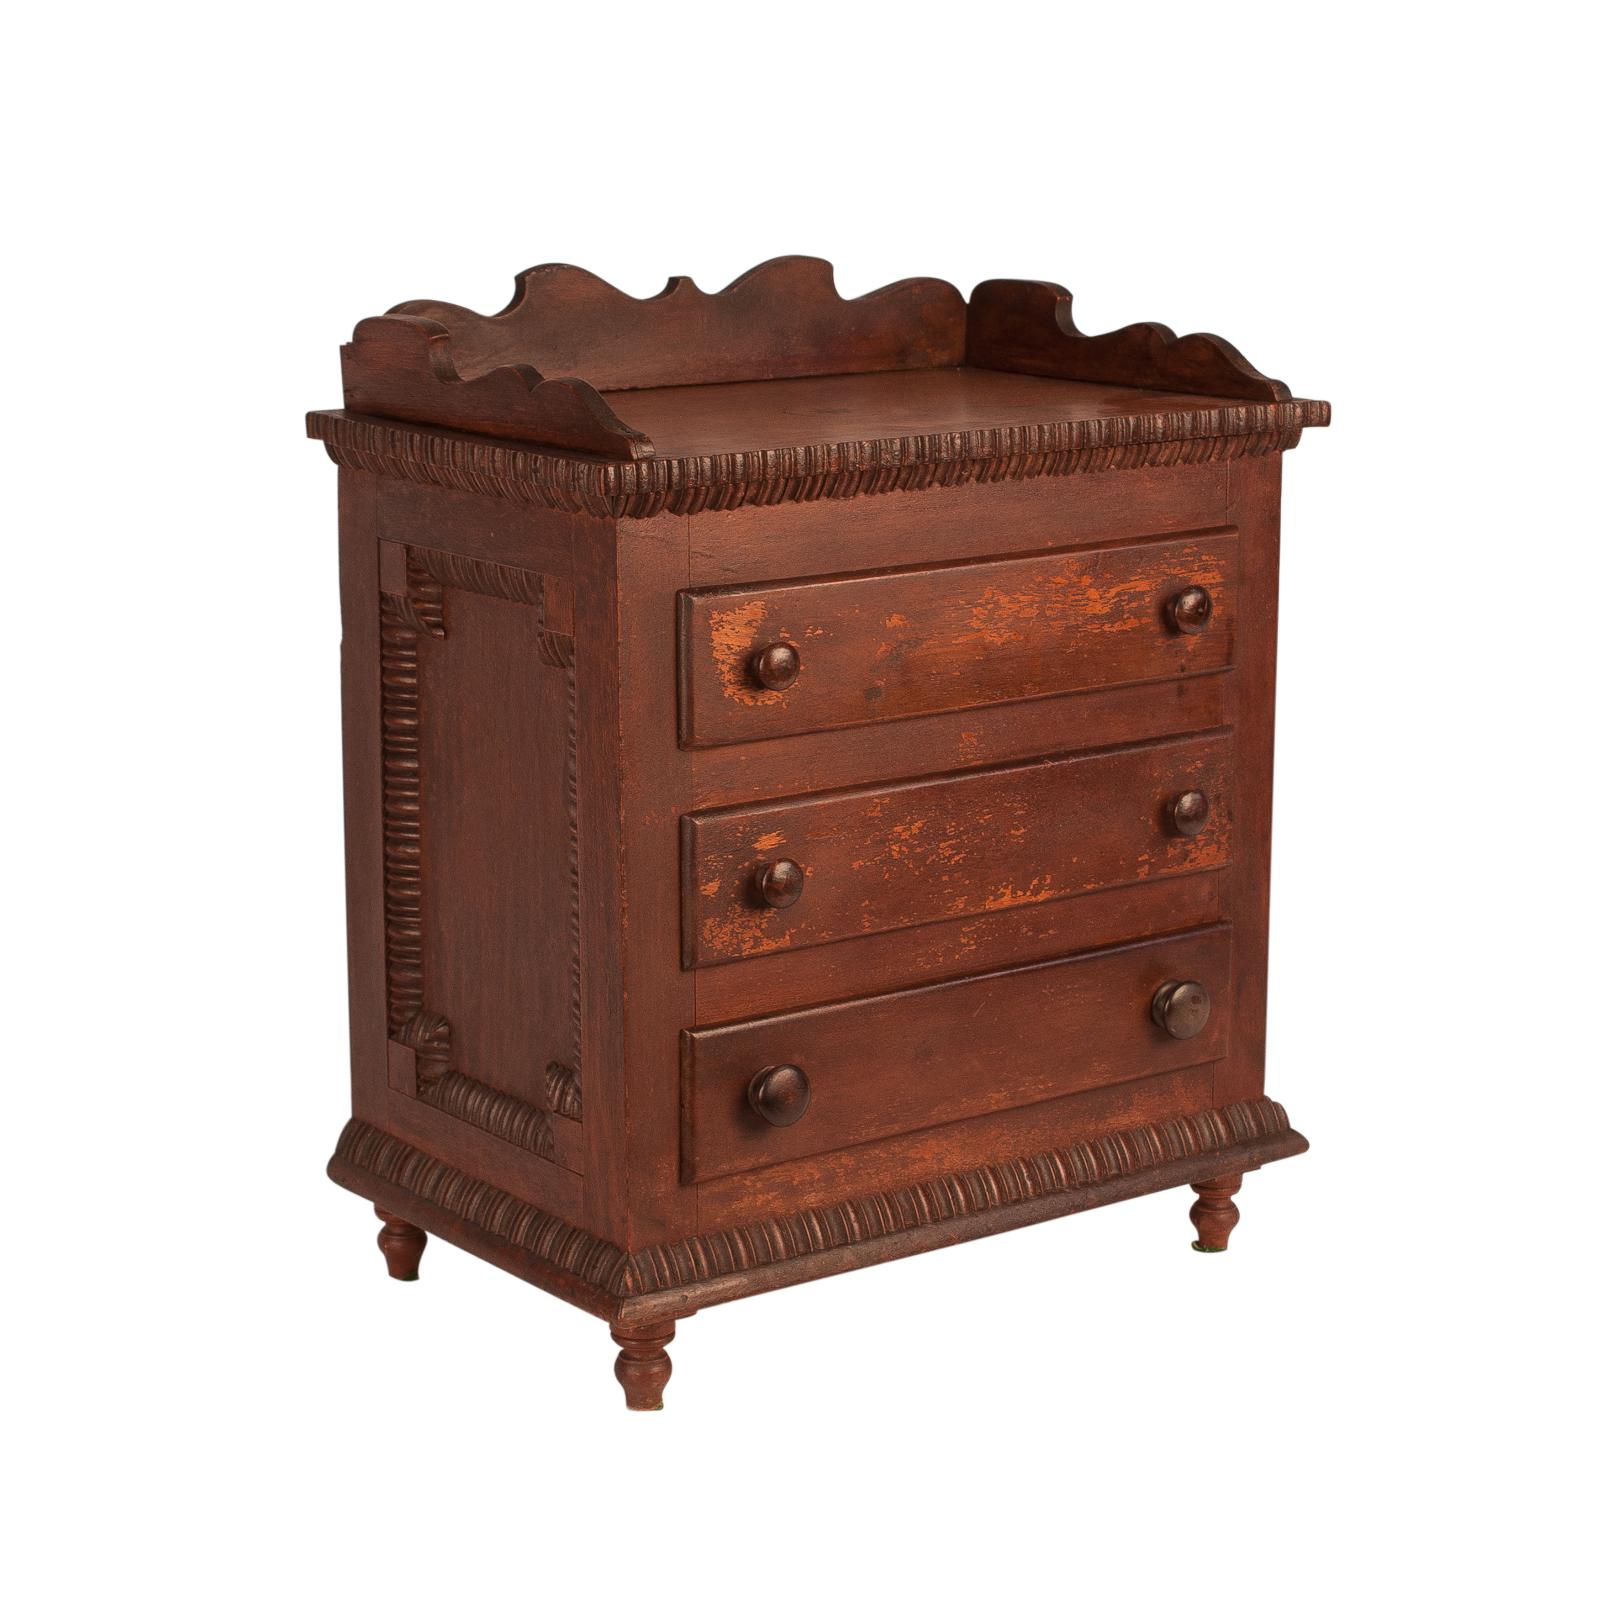 A late 19th century American salesman sample Tramp Art chest of drawers, circa 1890.